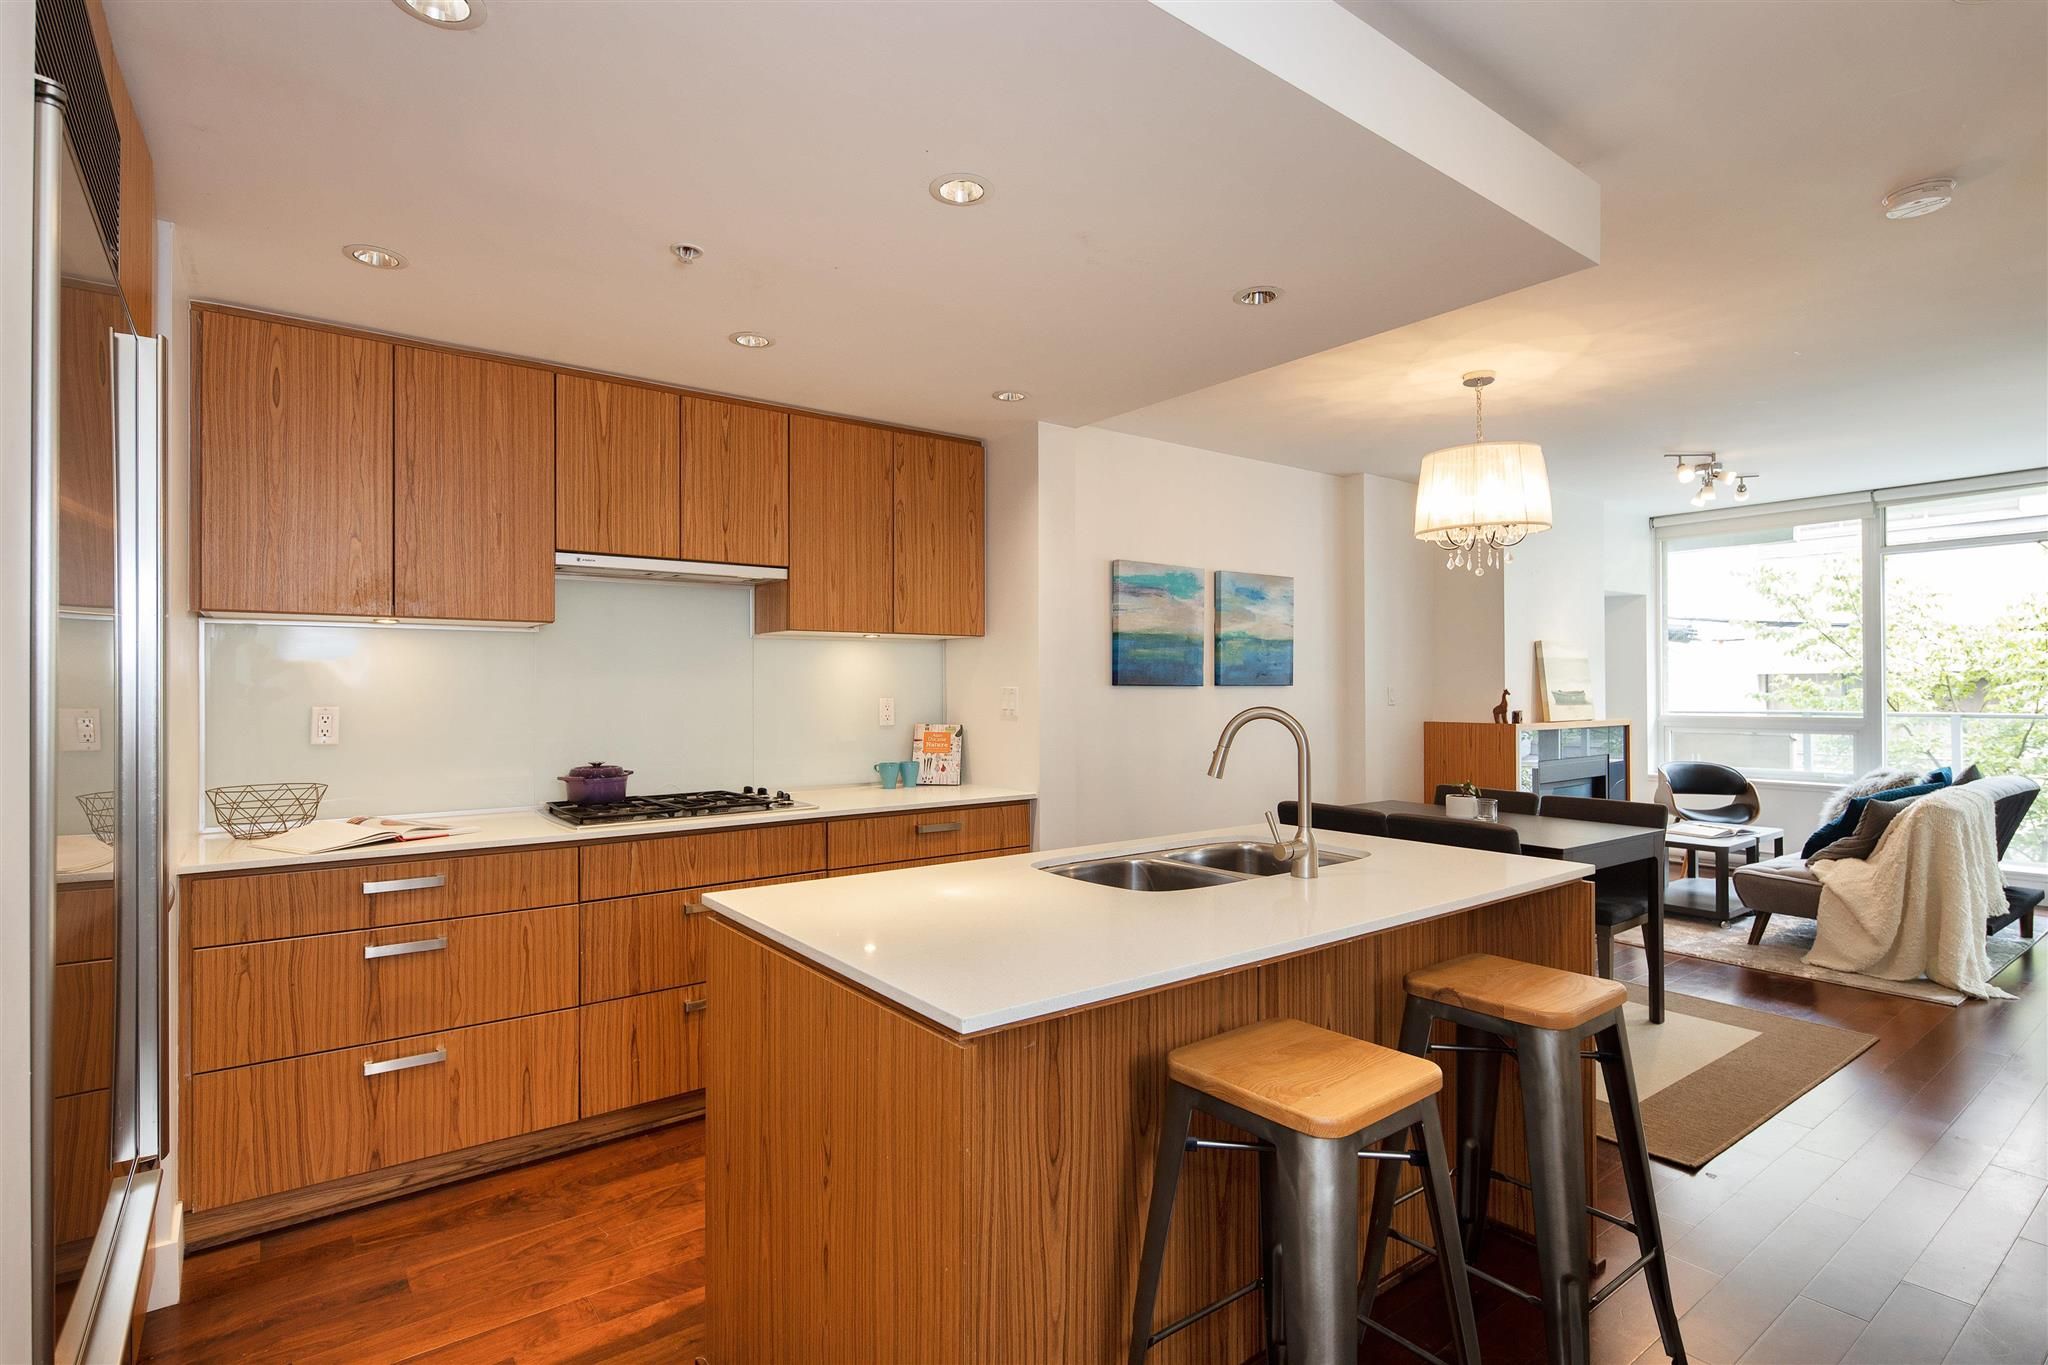 Main Photo: 102 1675 W 8TH AVENUE in Vancouver: Fairview VW Condo for sale (Vancouver West)  : MLS®# R2590359